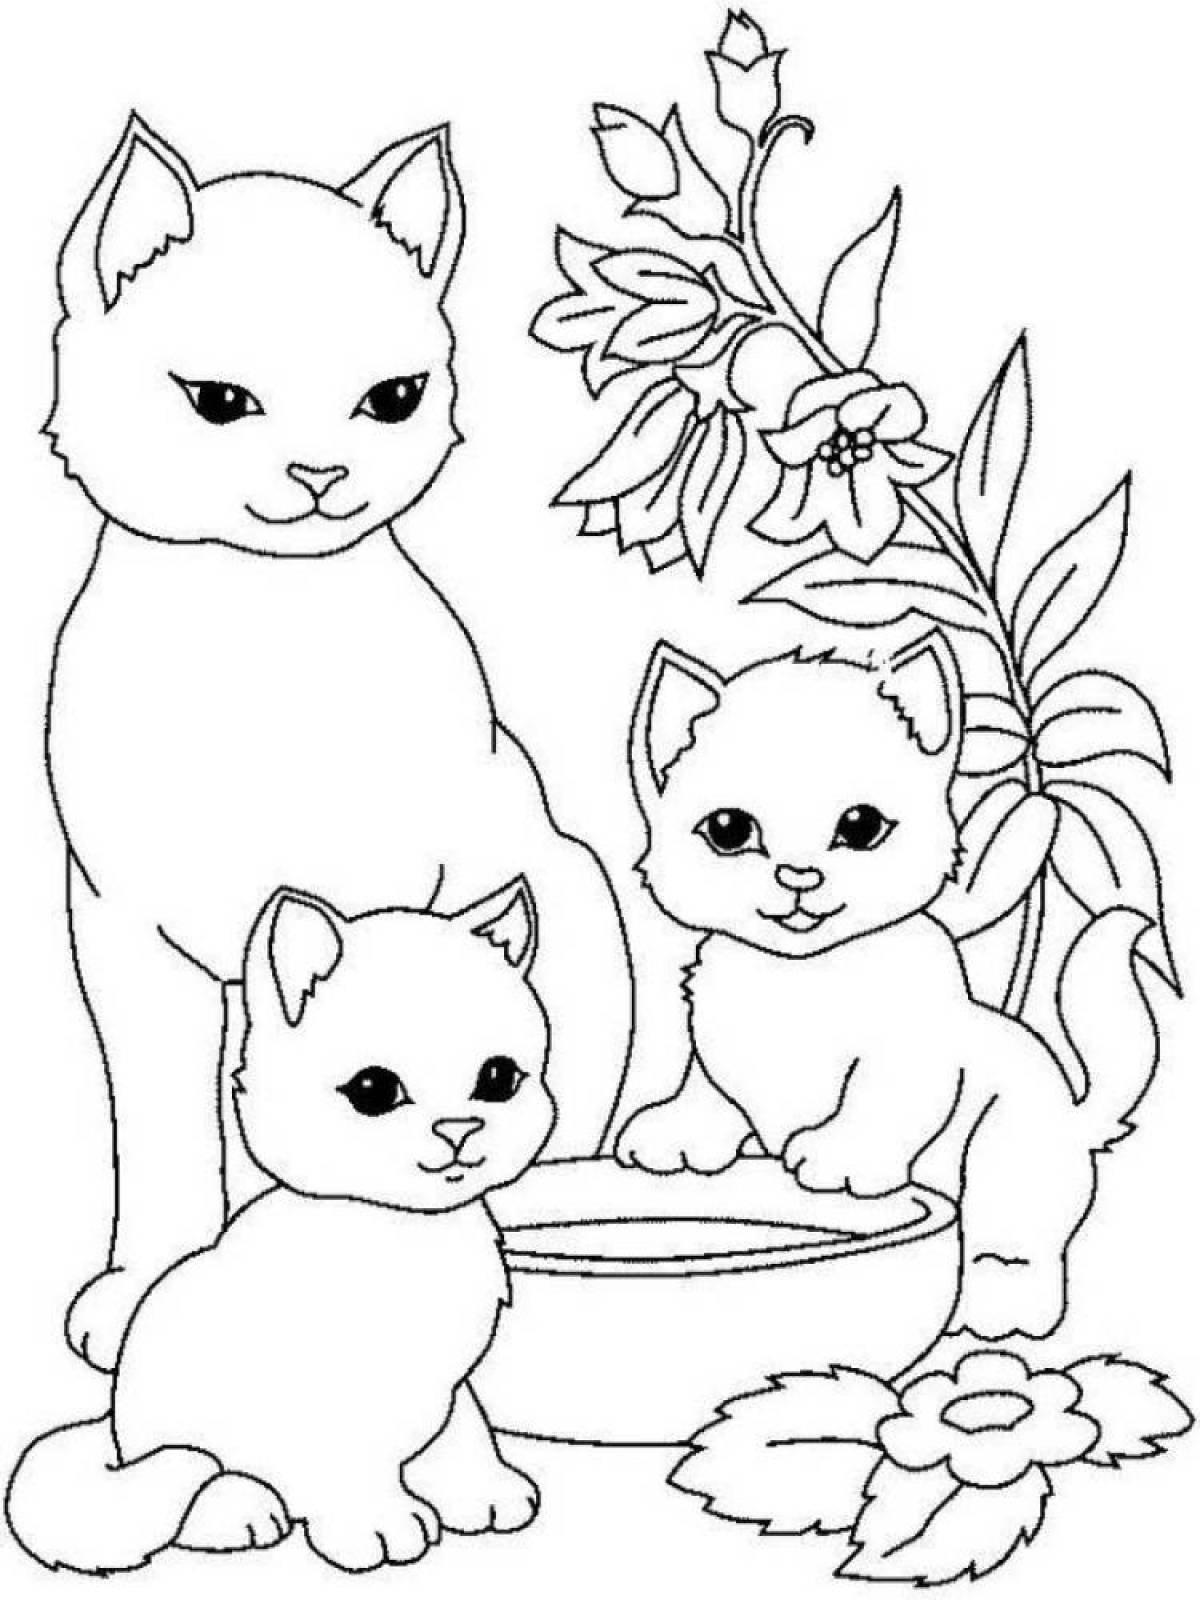 Elegant coloring book for kitty girls